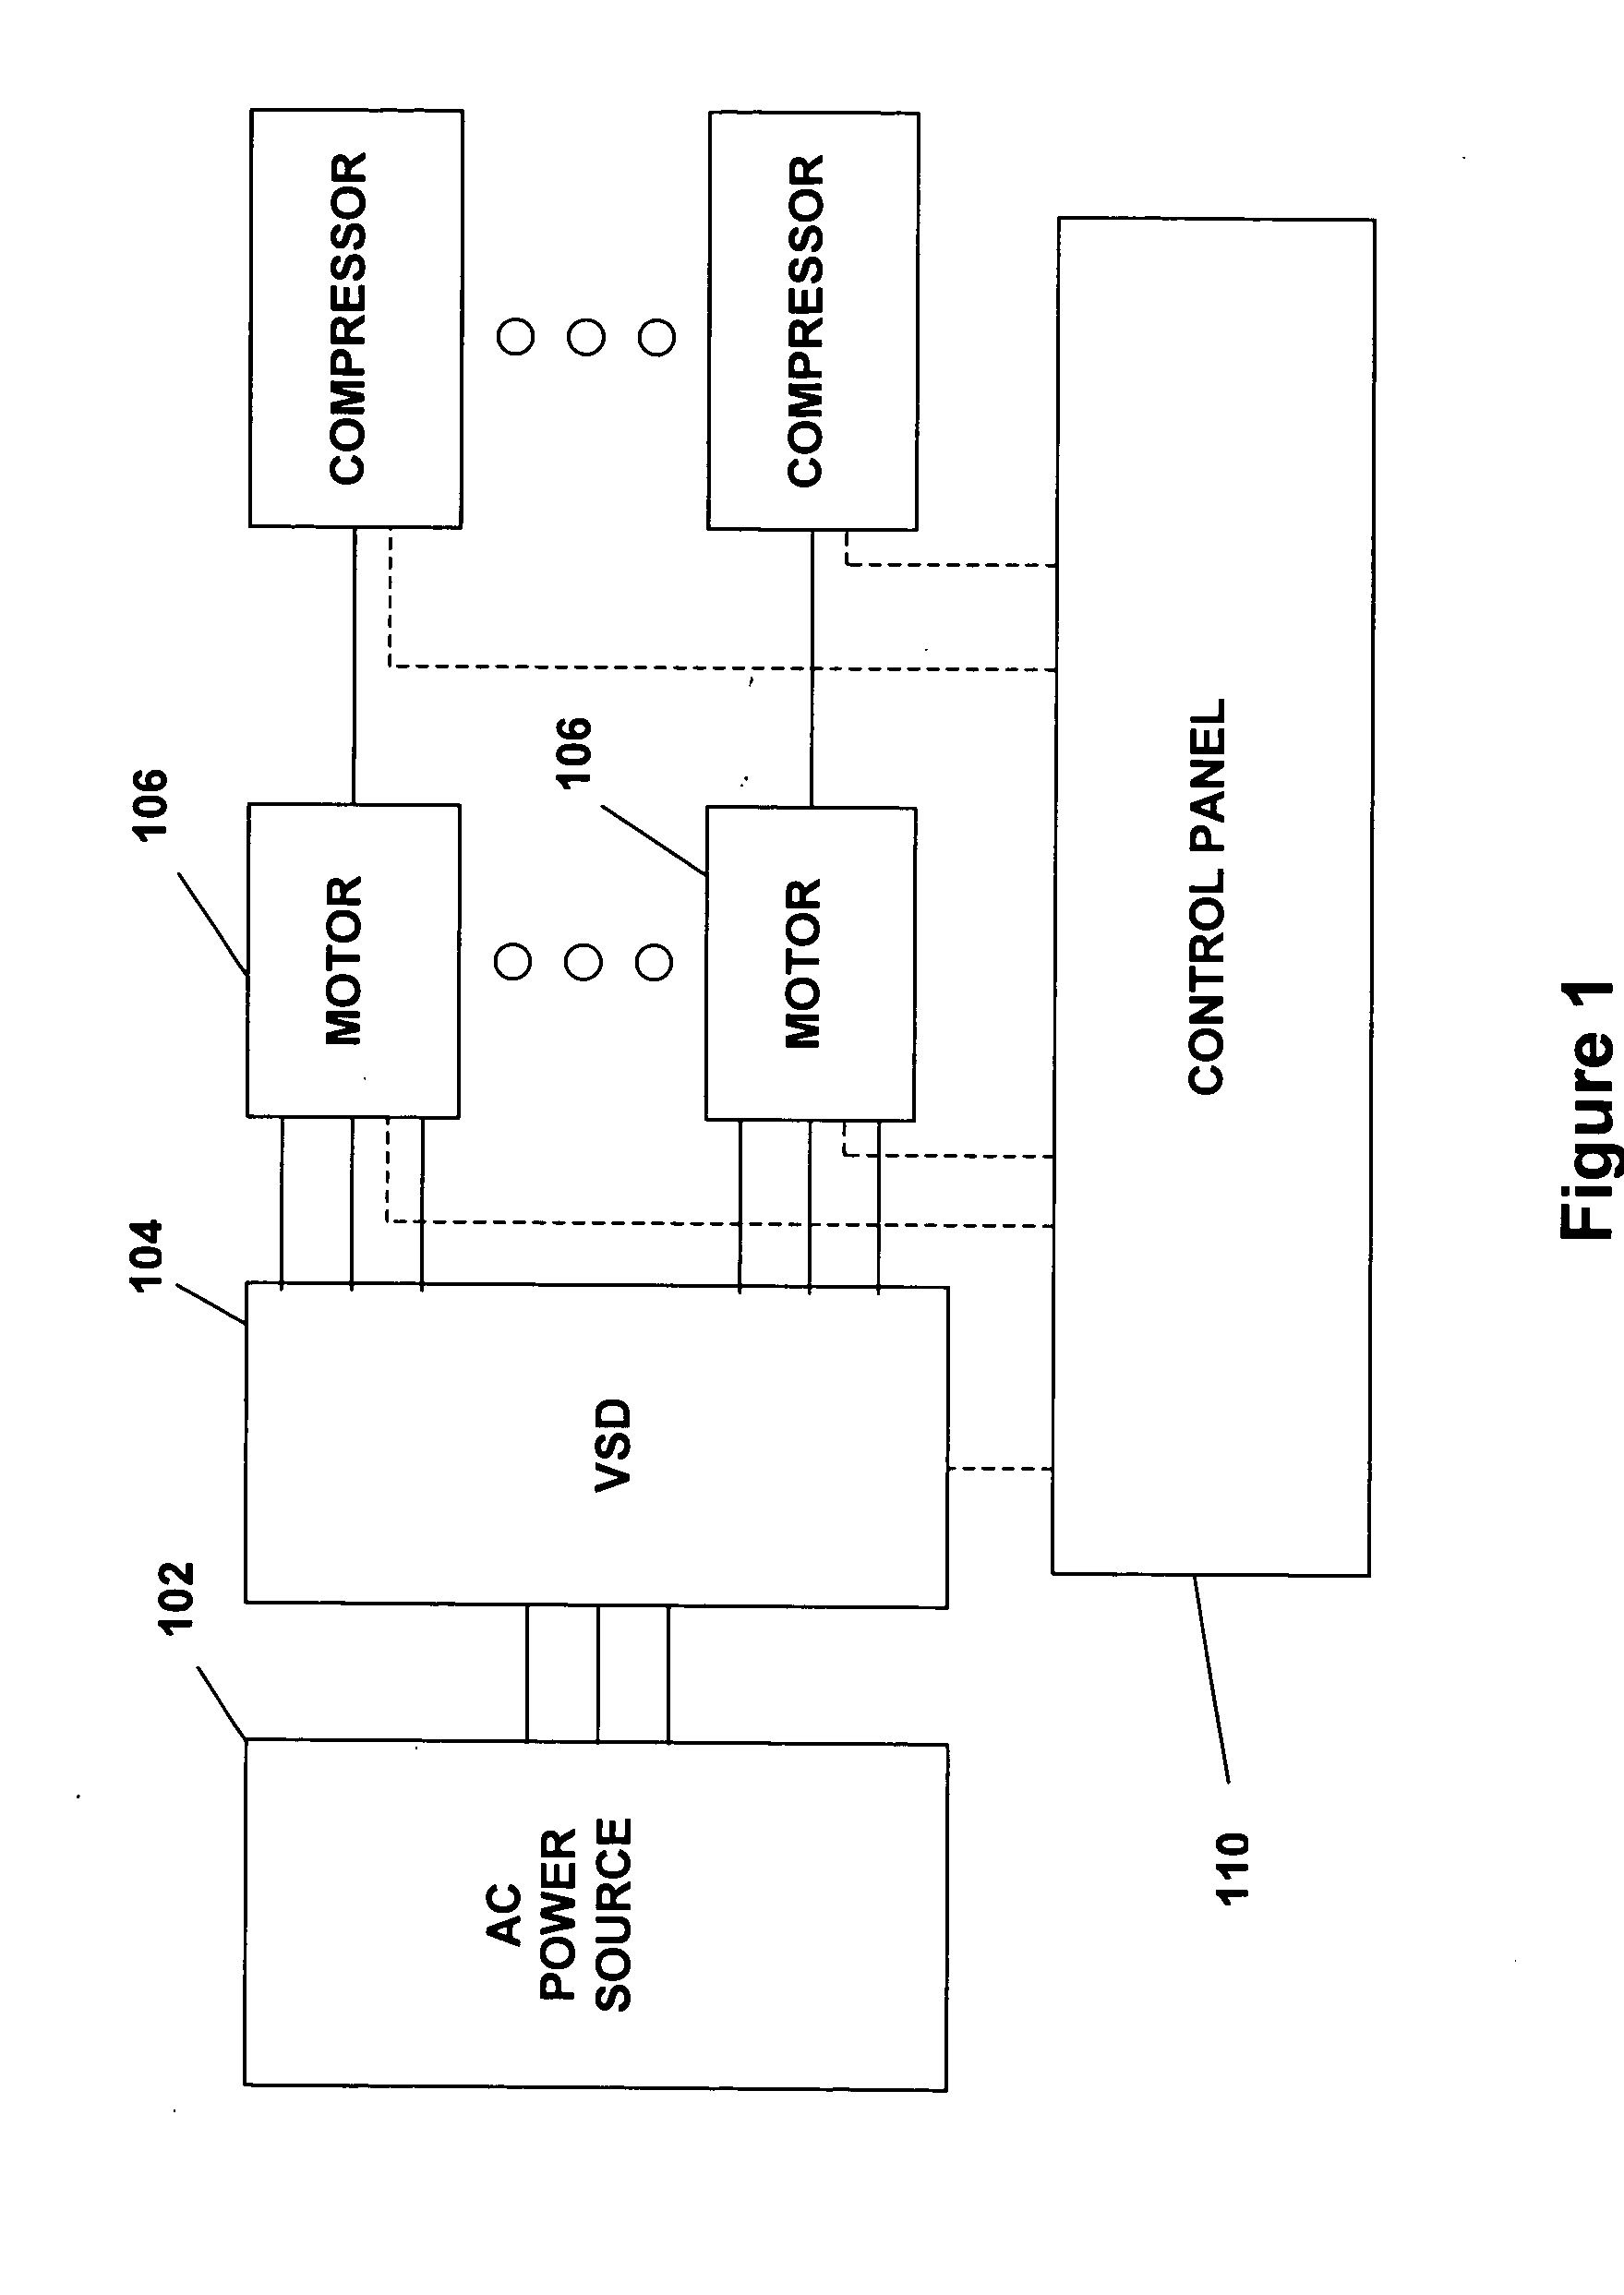 System and method for capacity control in a multiple compressor chiller system